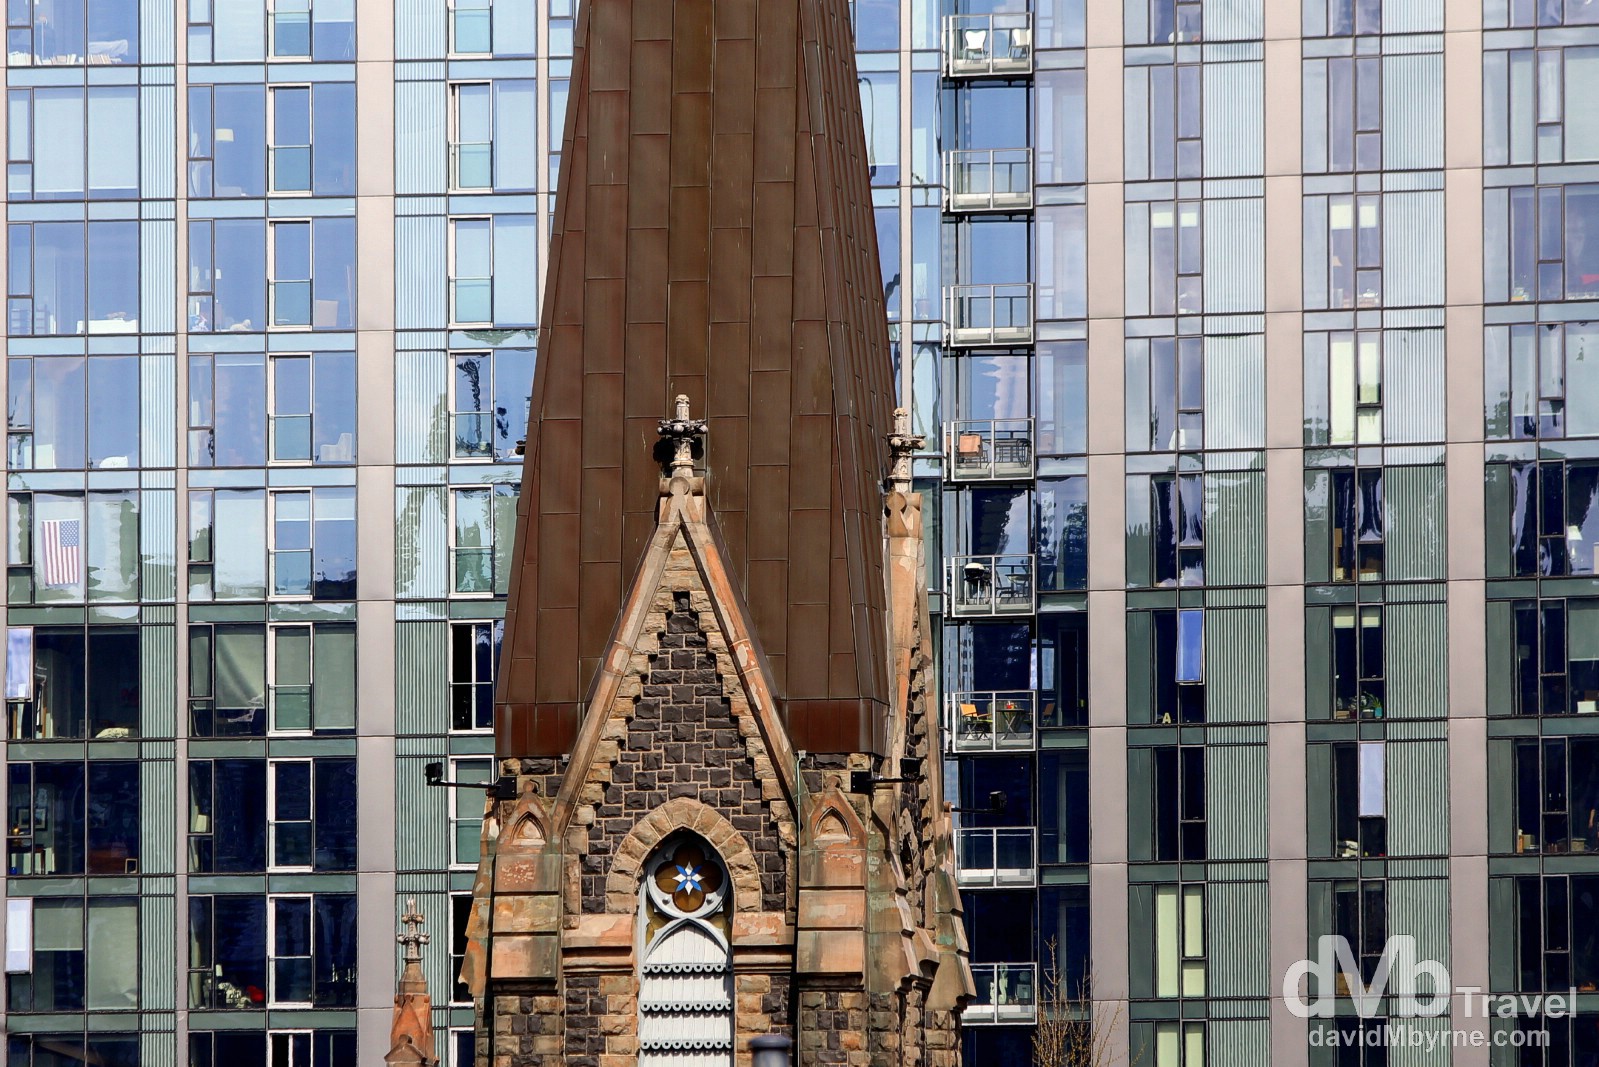 Old & new. A portion of the spire of the First Presbyterian Church set against an office & residential block in Portland, Oregon, USA. March 28, 2013. 